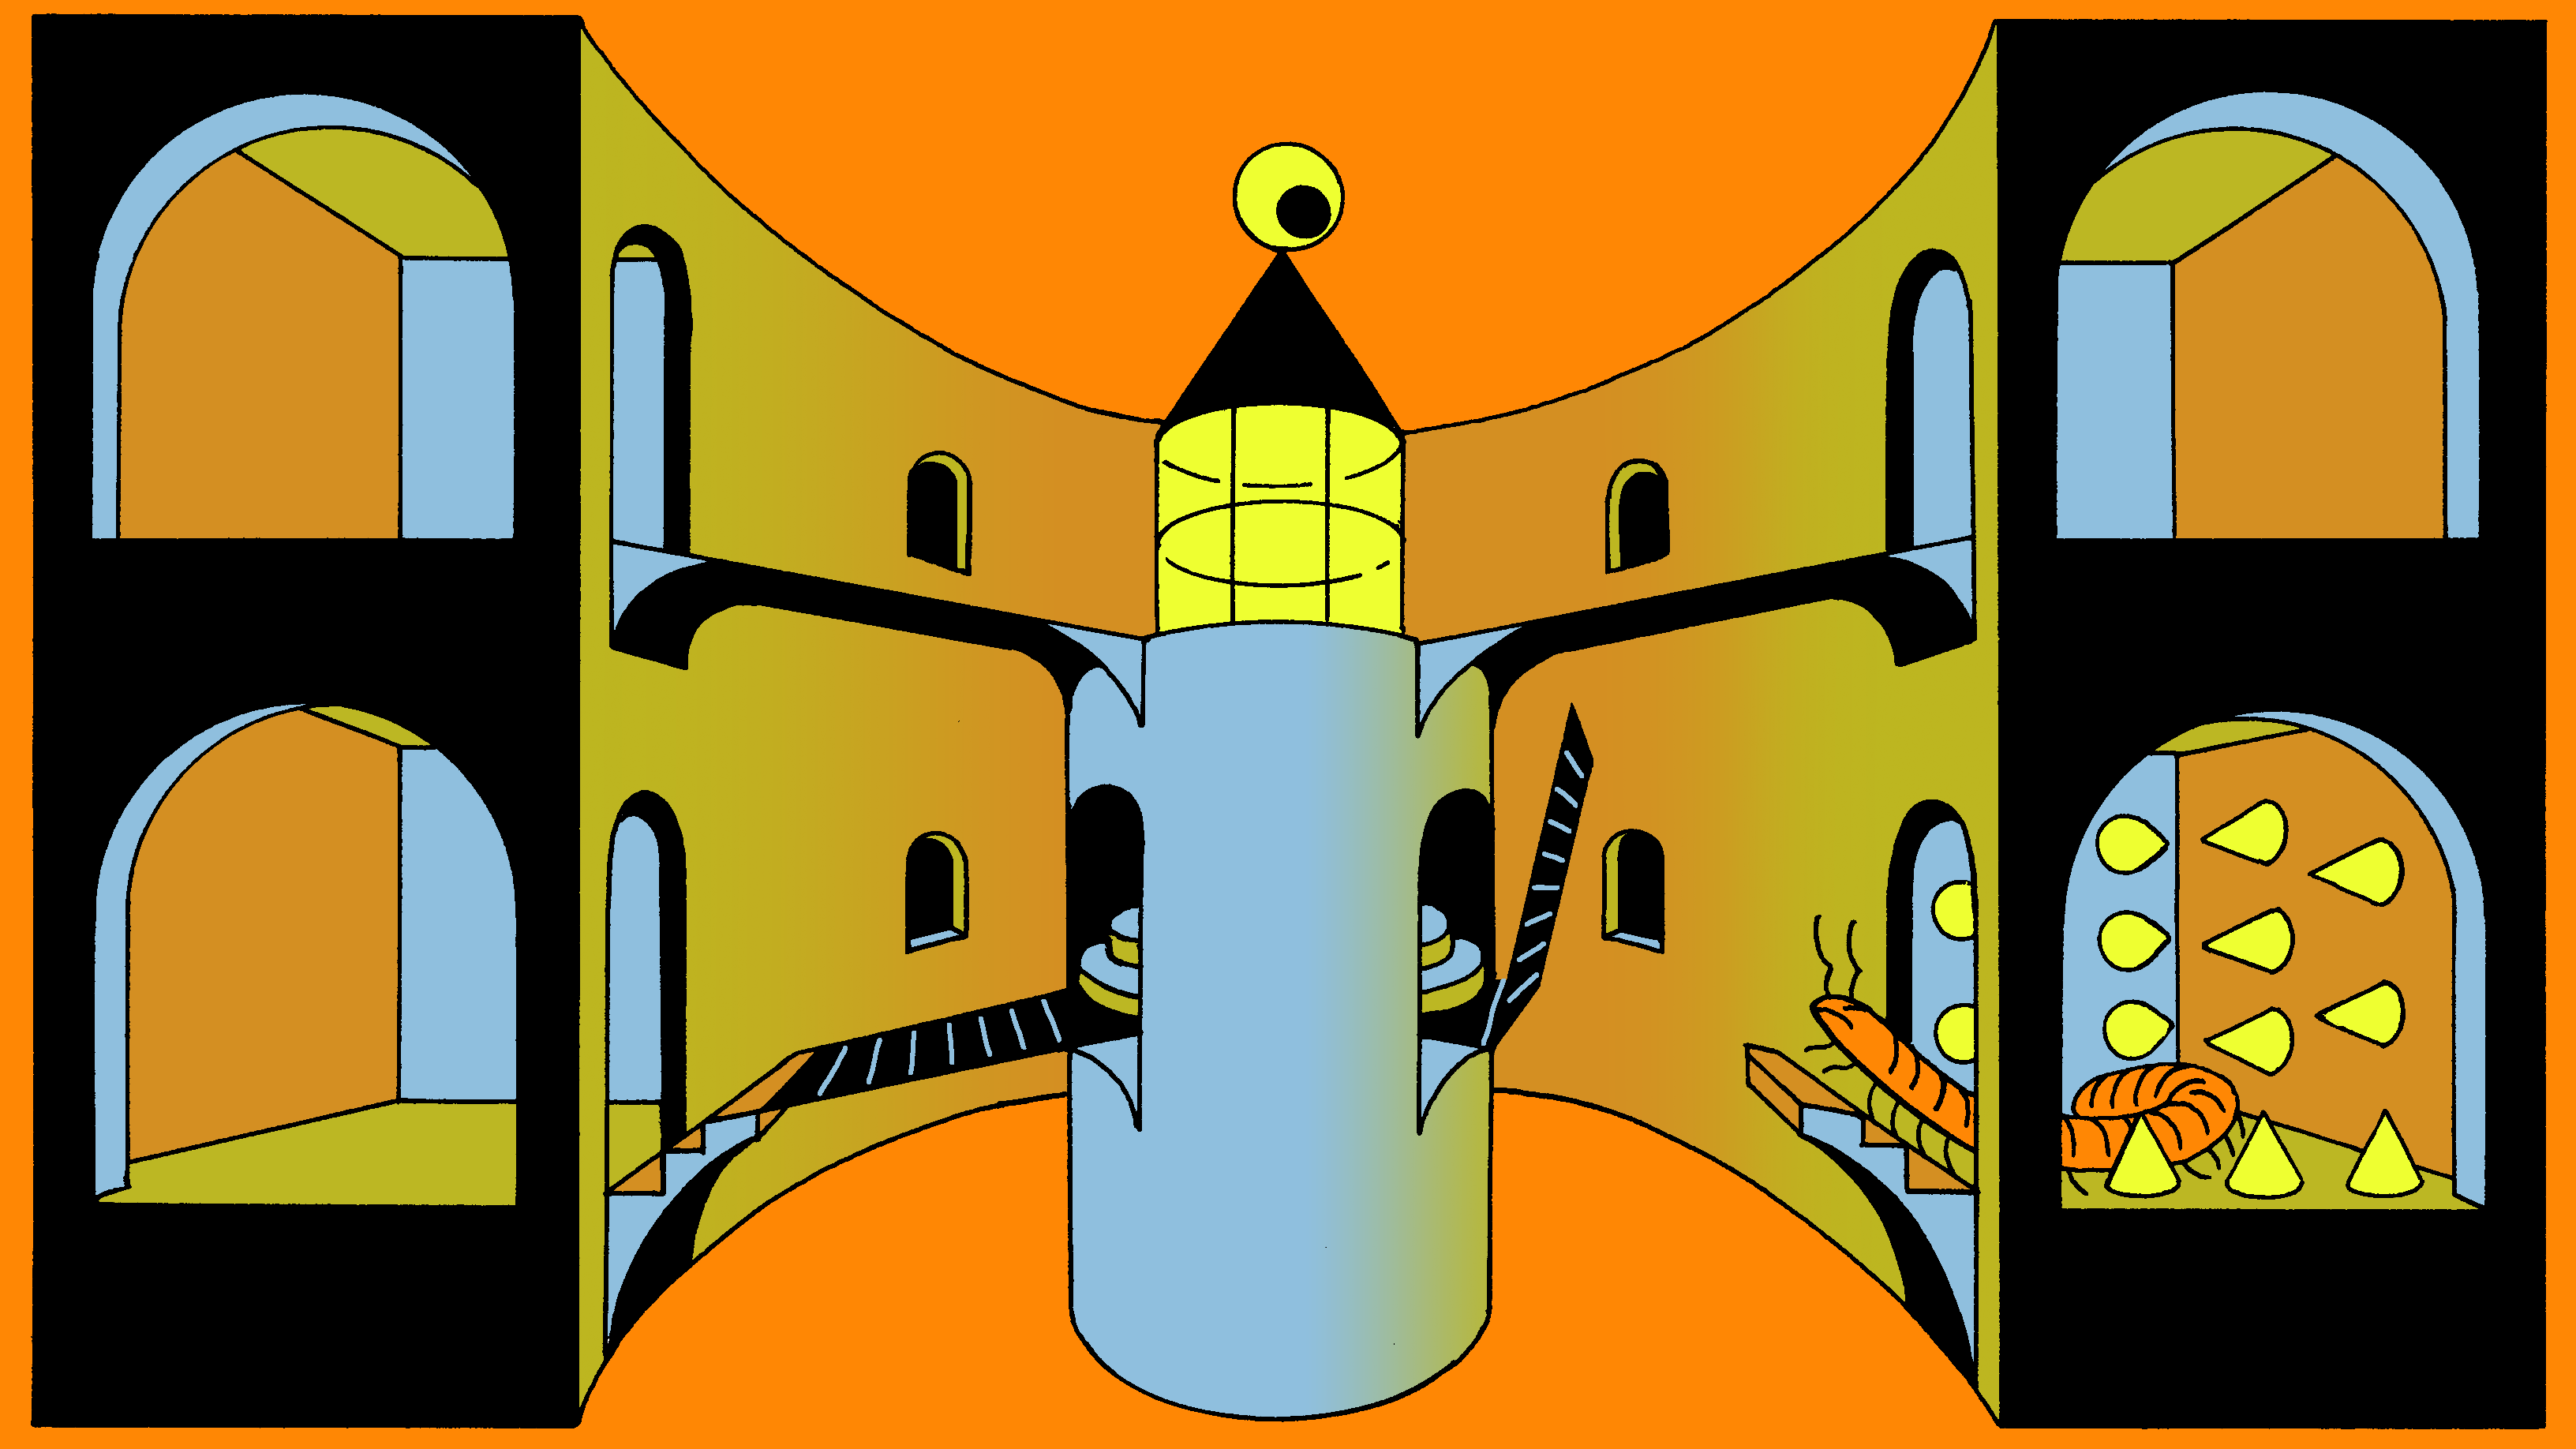 The inside of a castle tower has four rooms on two different levels, each with their own window. A millipede tries to get to the center of the tower, can't access the drawbridge.